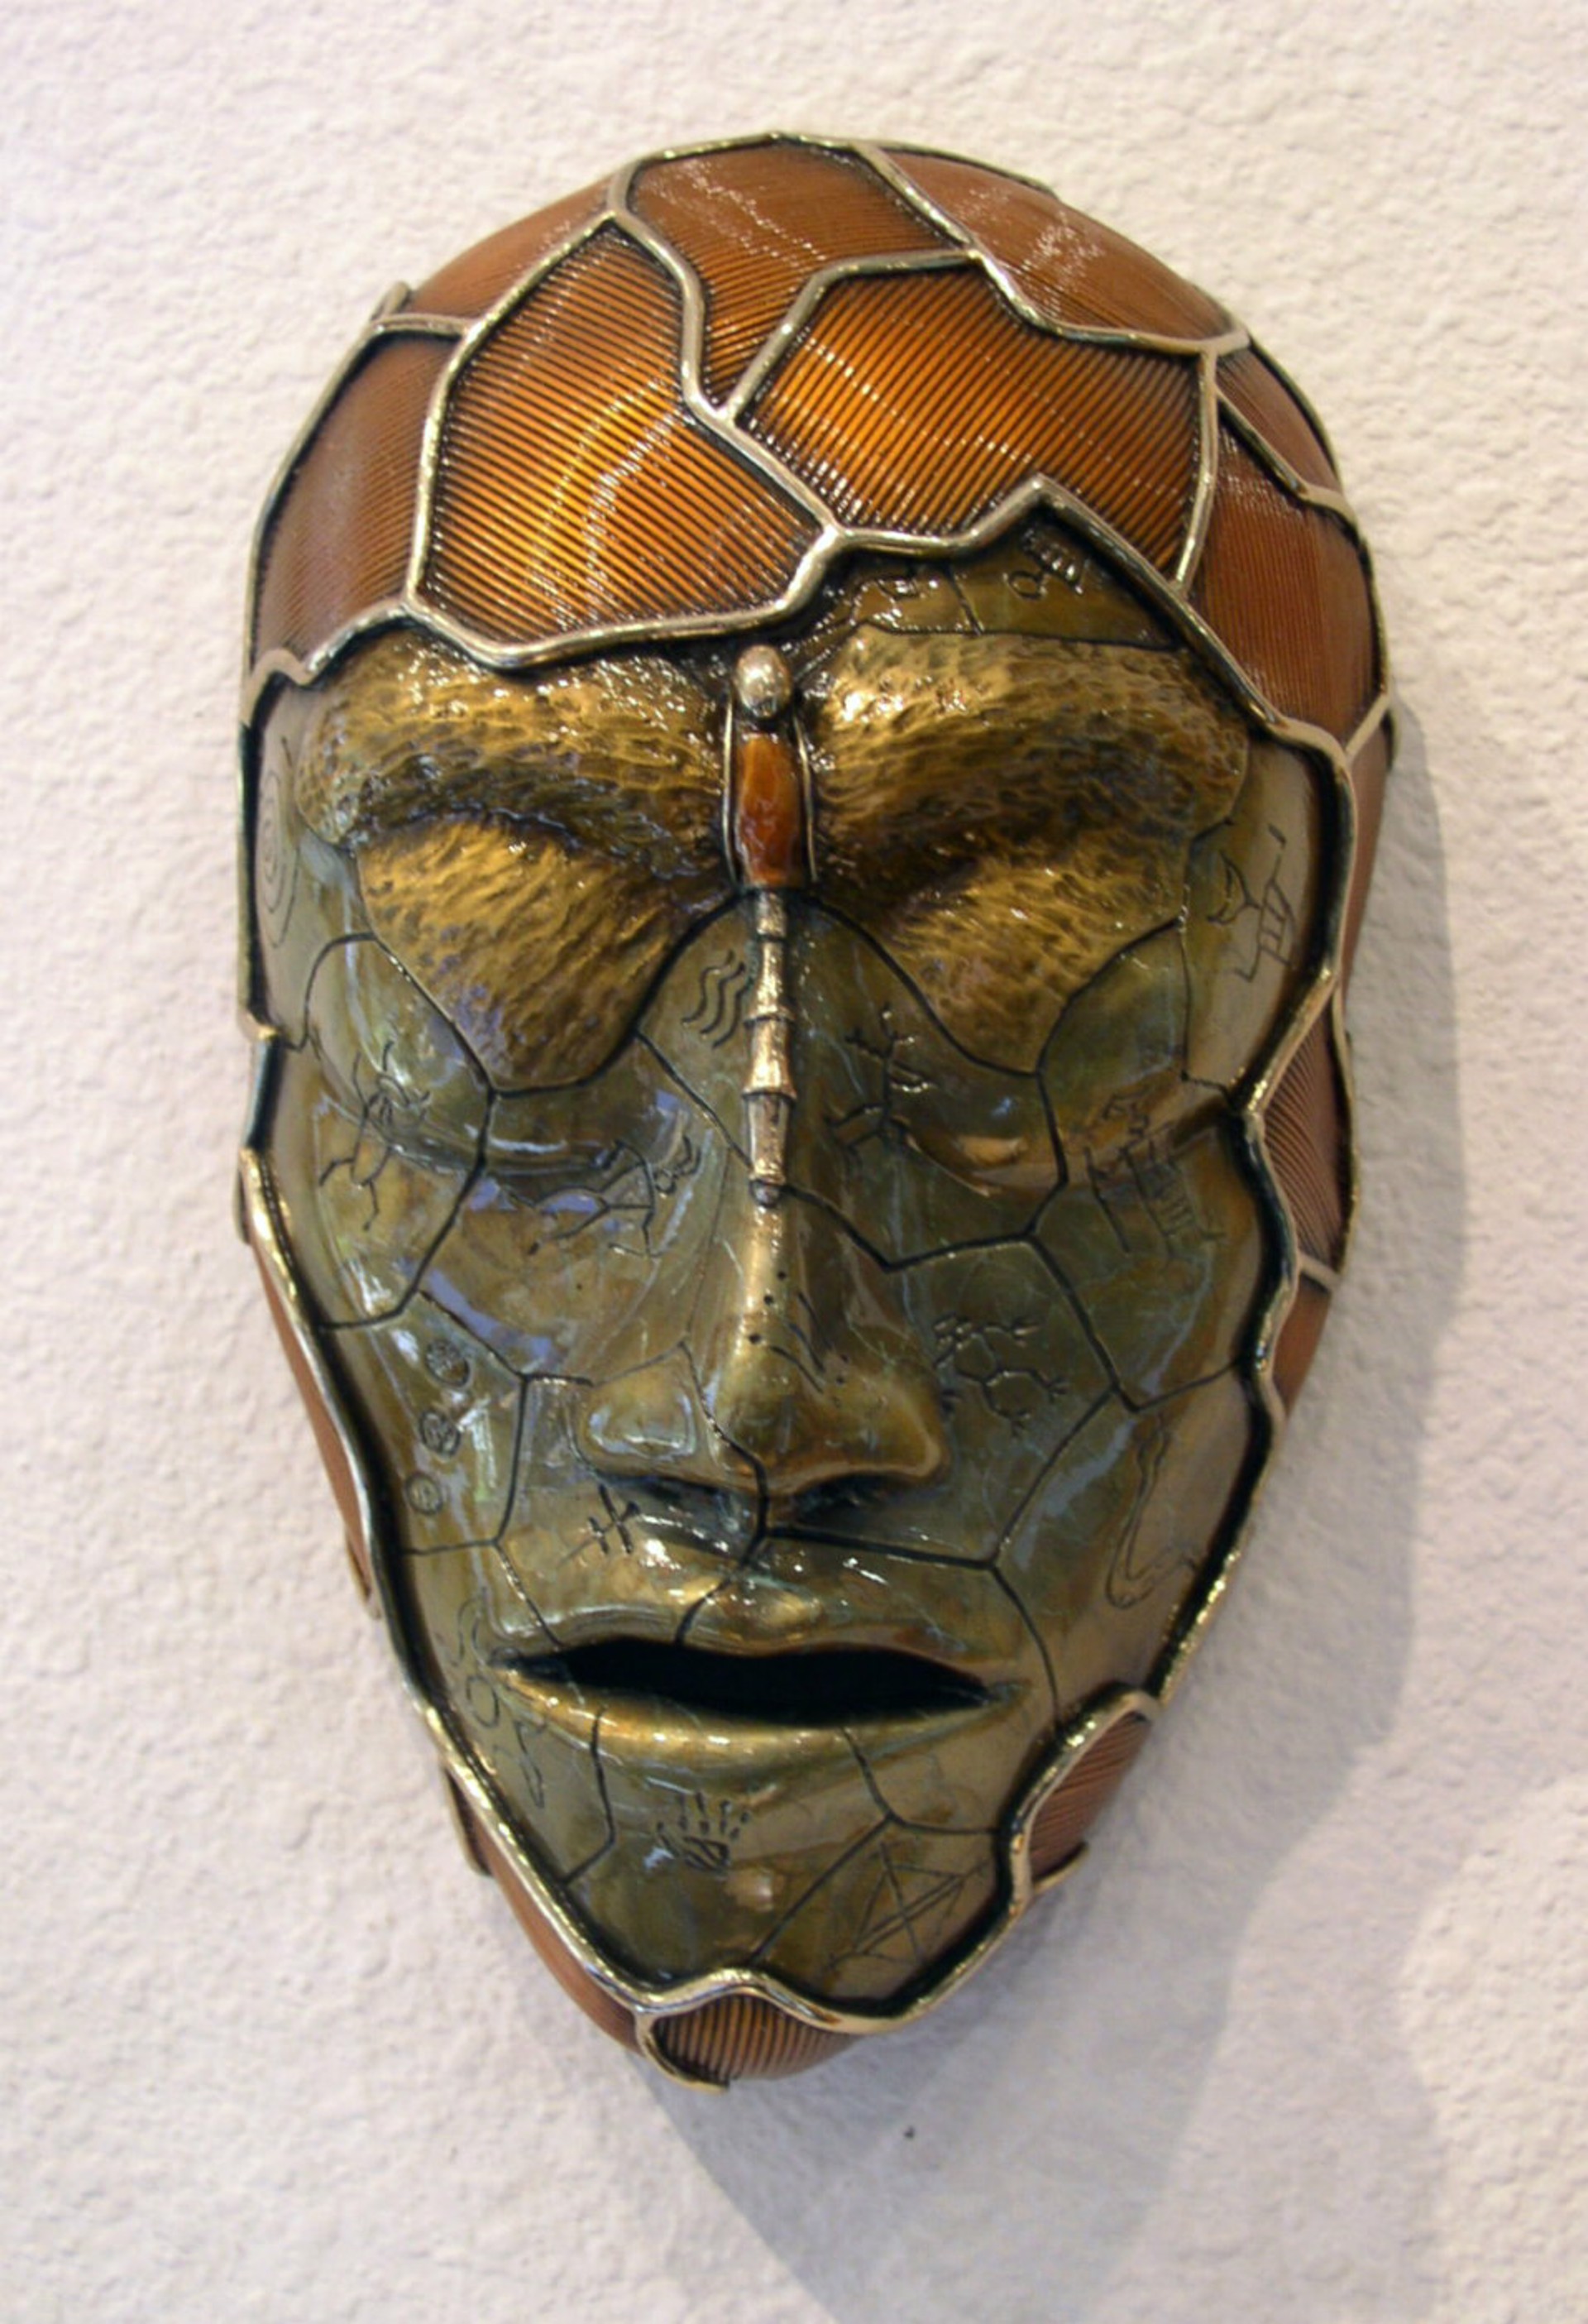 Earth Mask by Robert Rogers